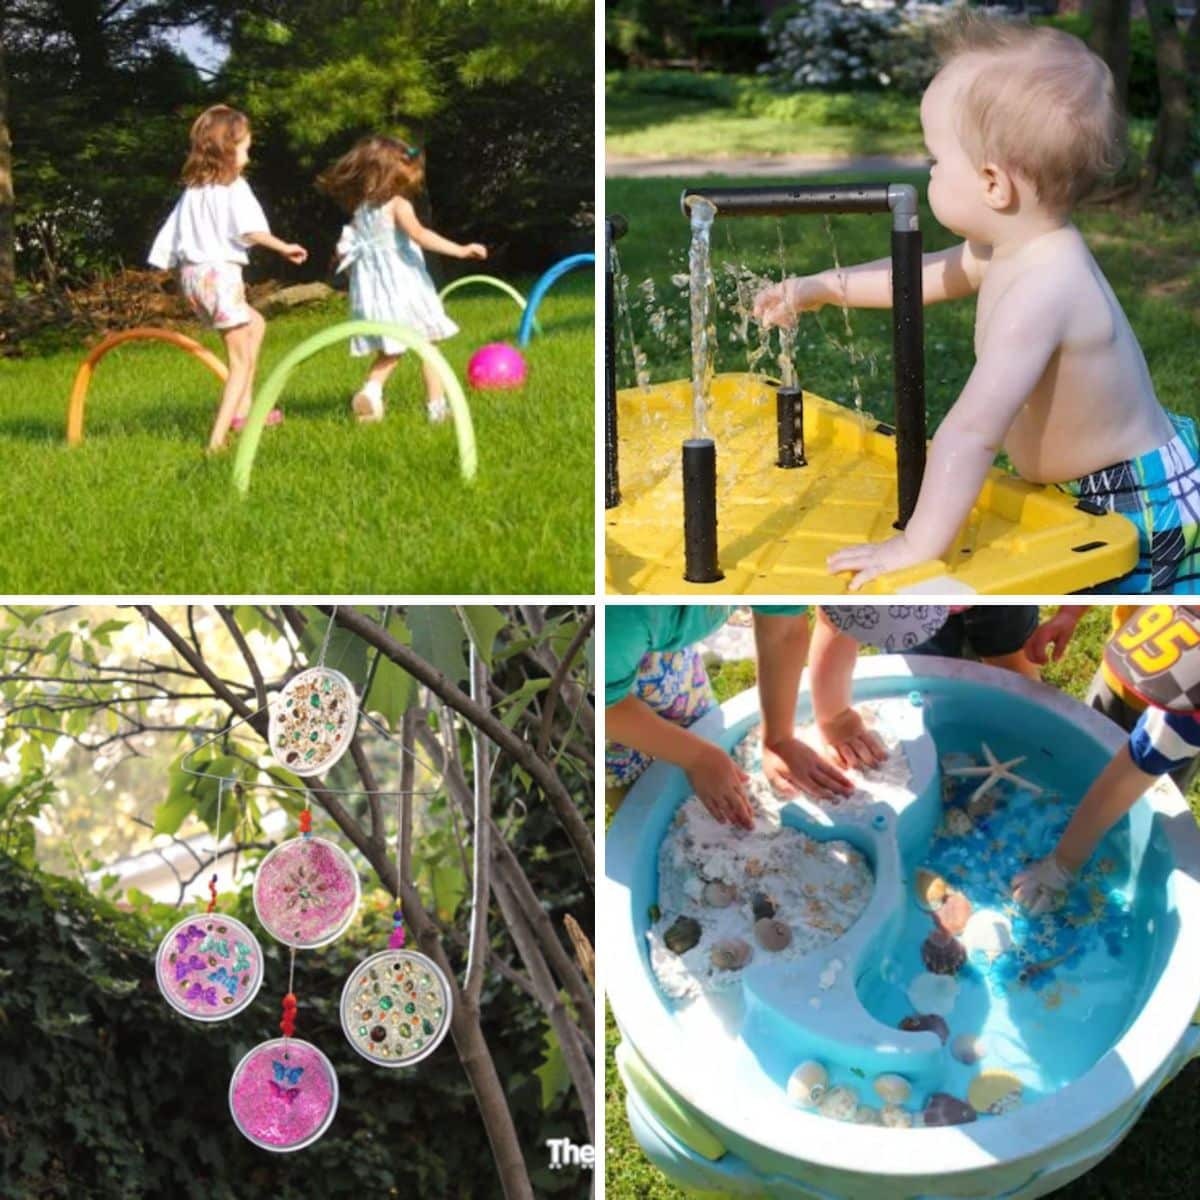 4 images of entertaining summer activities for kids.